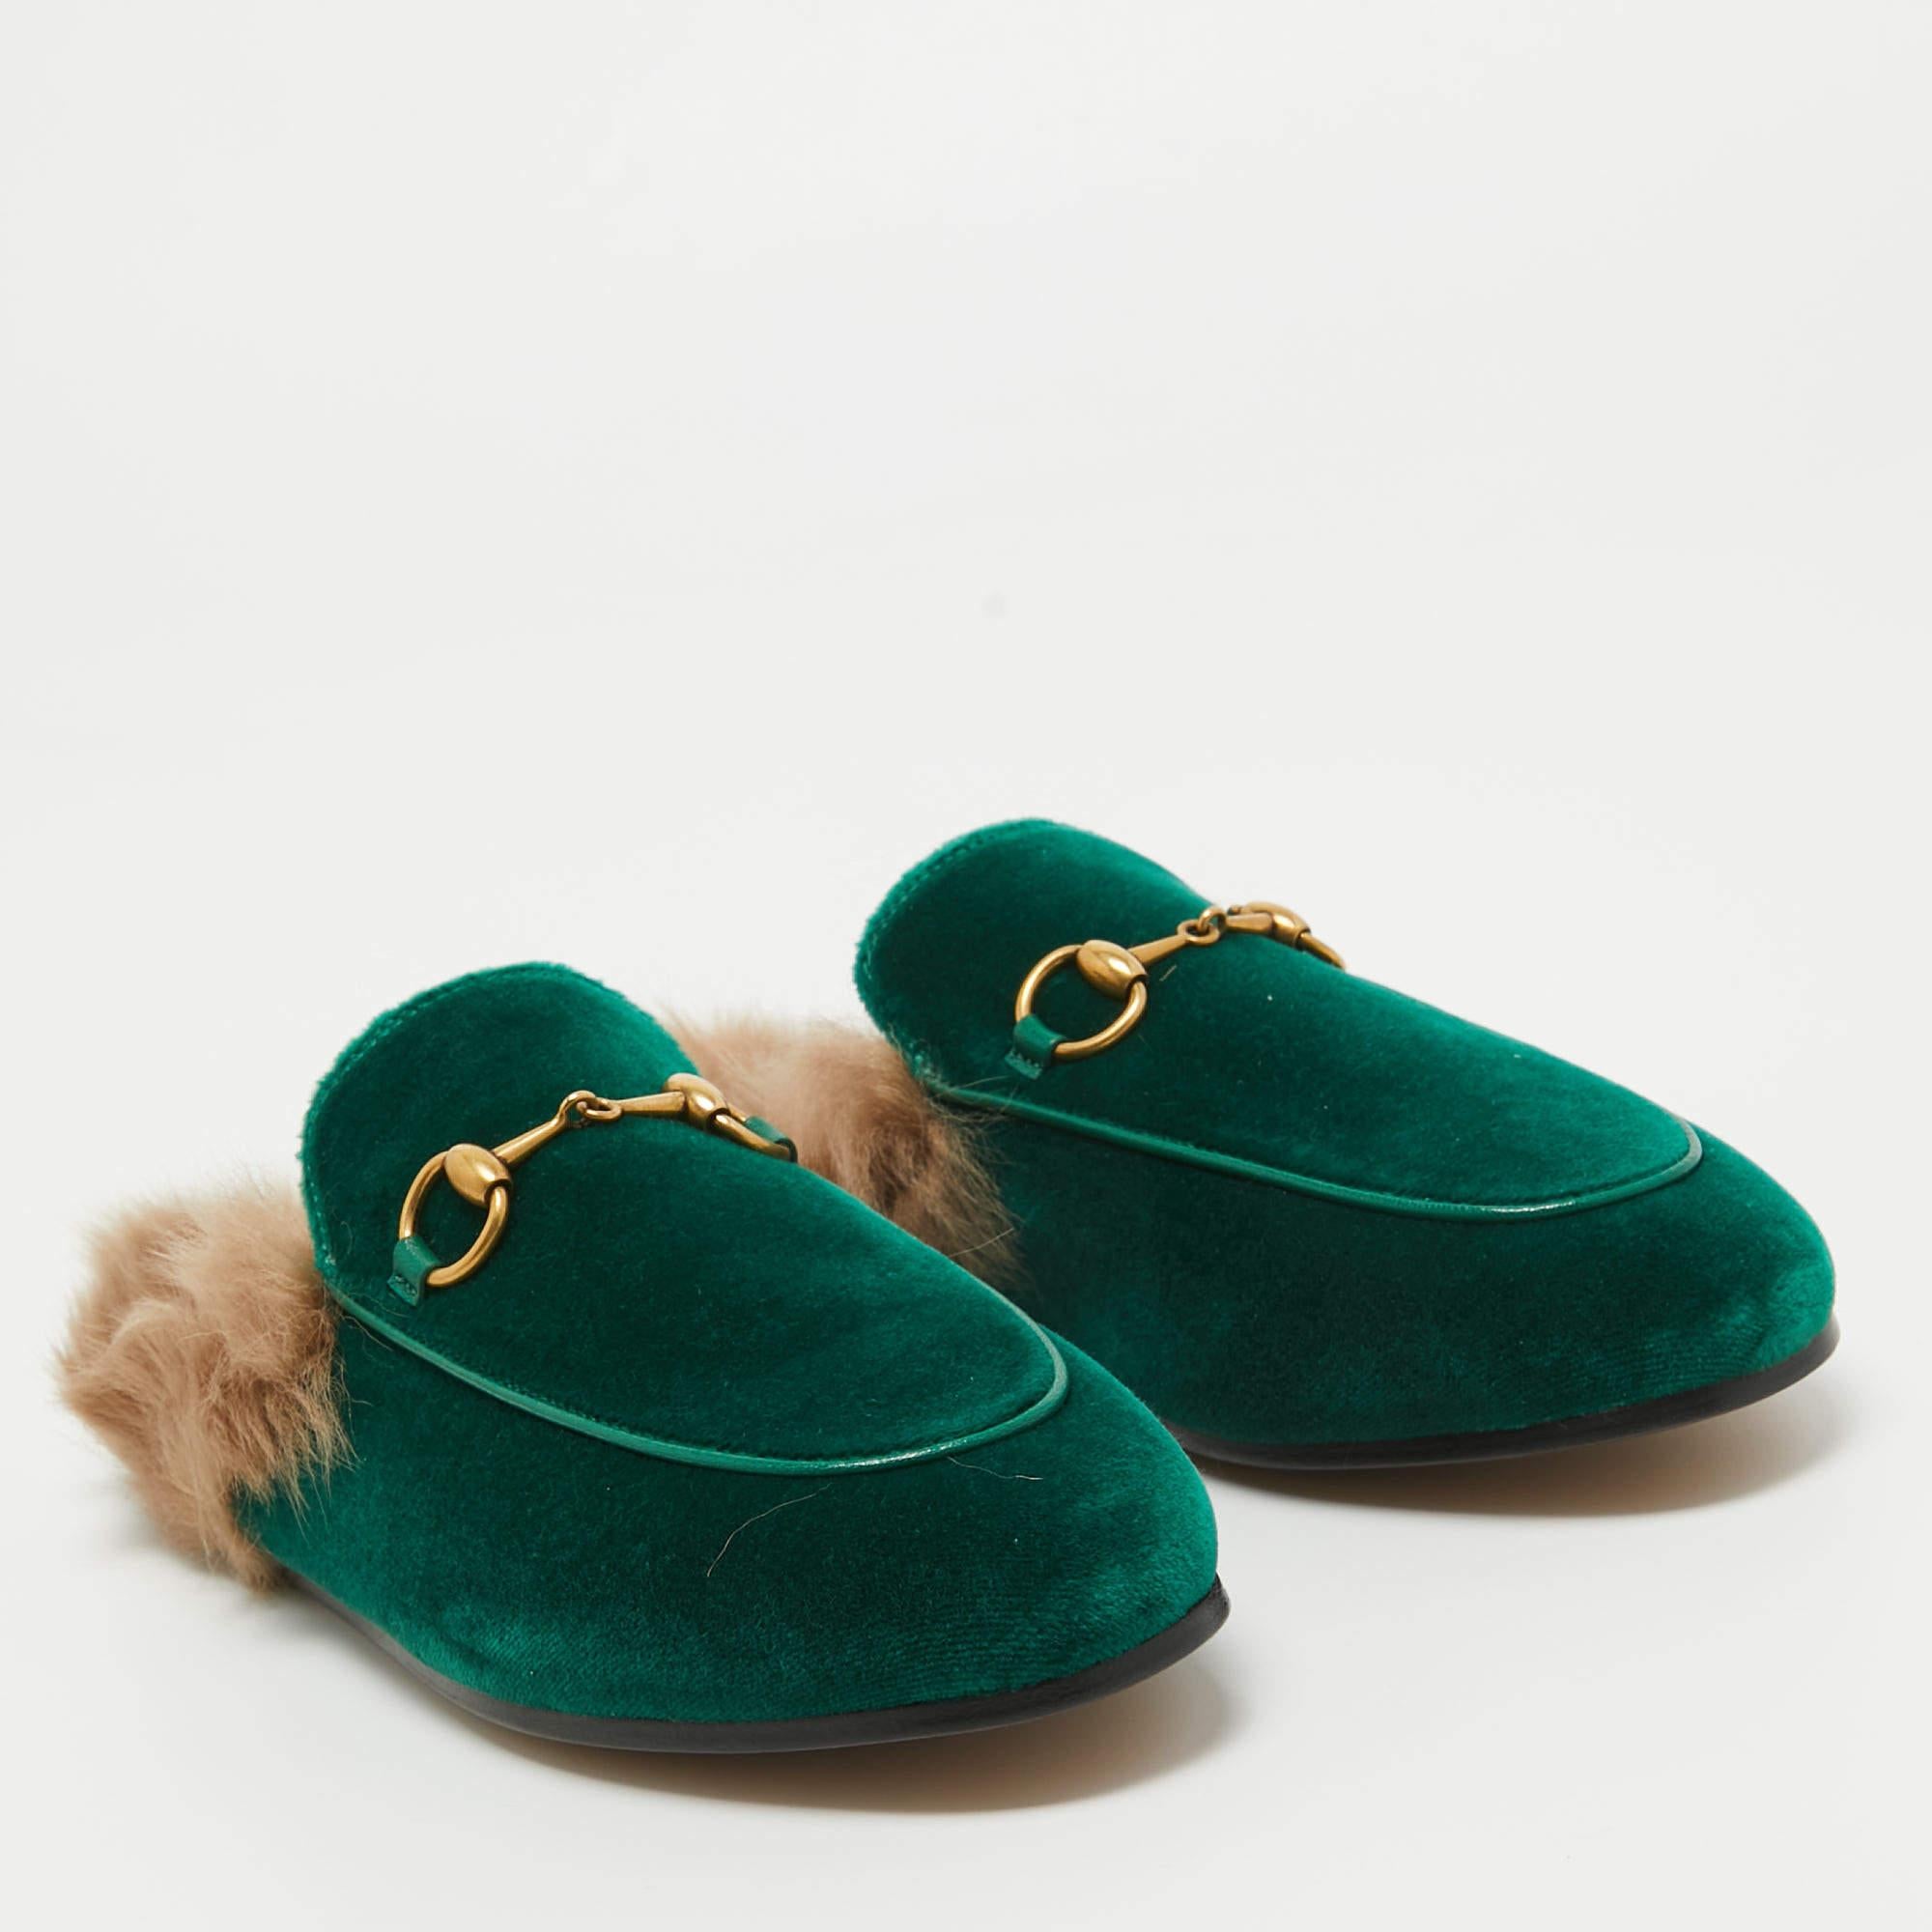 These Gucci Princetown mules signify luxury and practicality. An ultimate favorite of style enthusiasts, the silhouette of this pair gets a luxe update with the Horsebit motif on the uppers. It comes made from velvet along with fur and features a